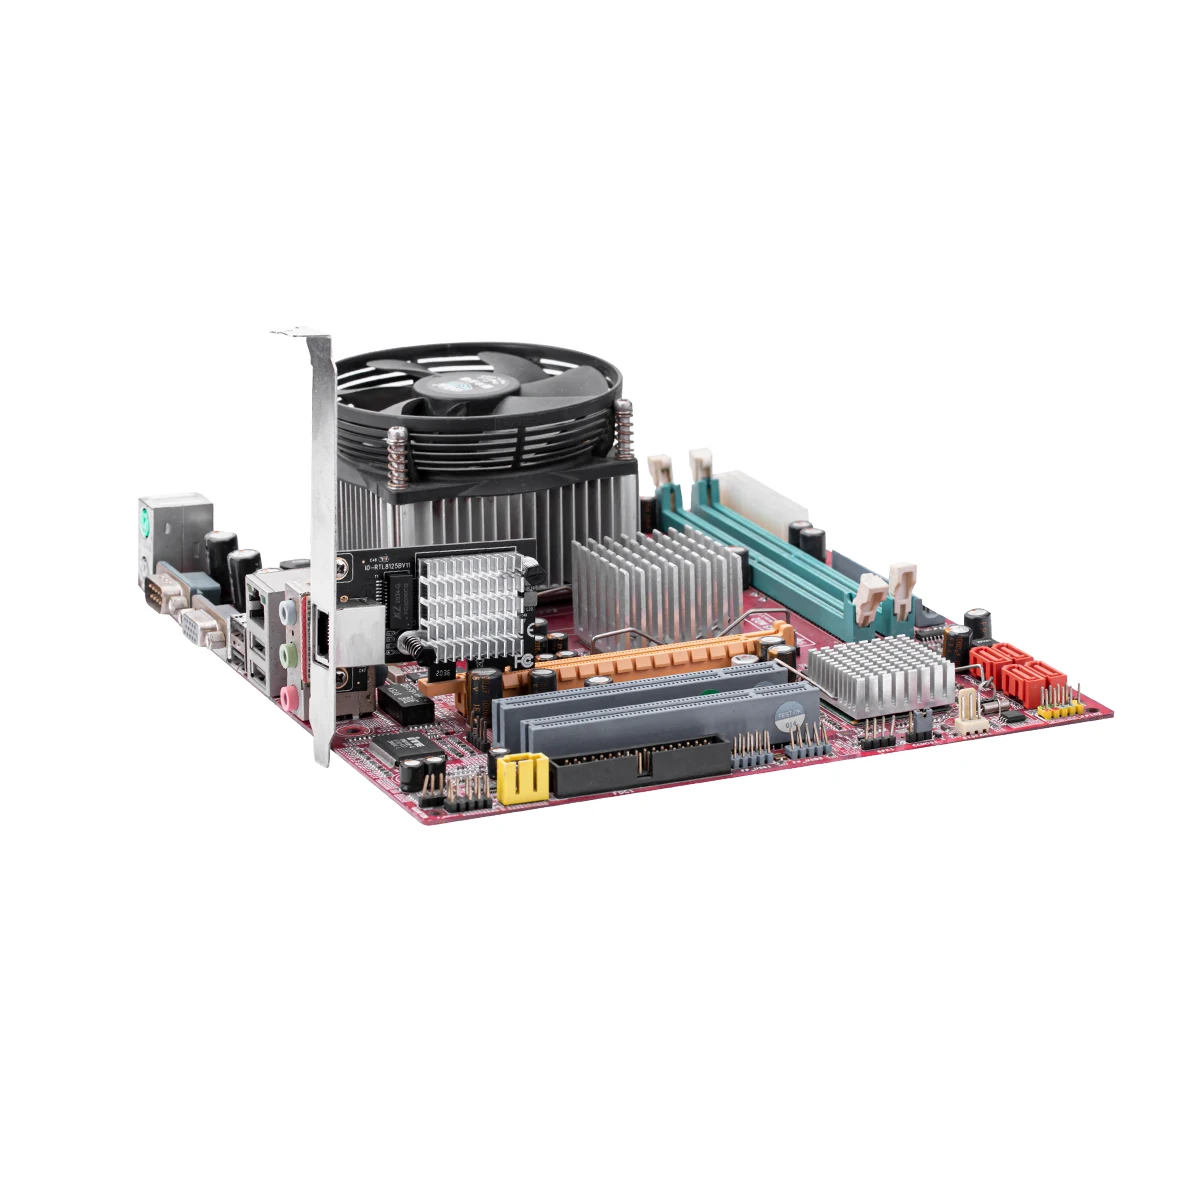 2.5GBase-T PCIe Network Adapter with 1 Port 2500/1000/100Mbps PCI Express Gigabit Ethernet Card